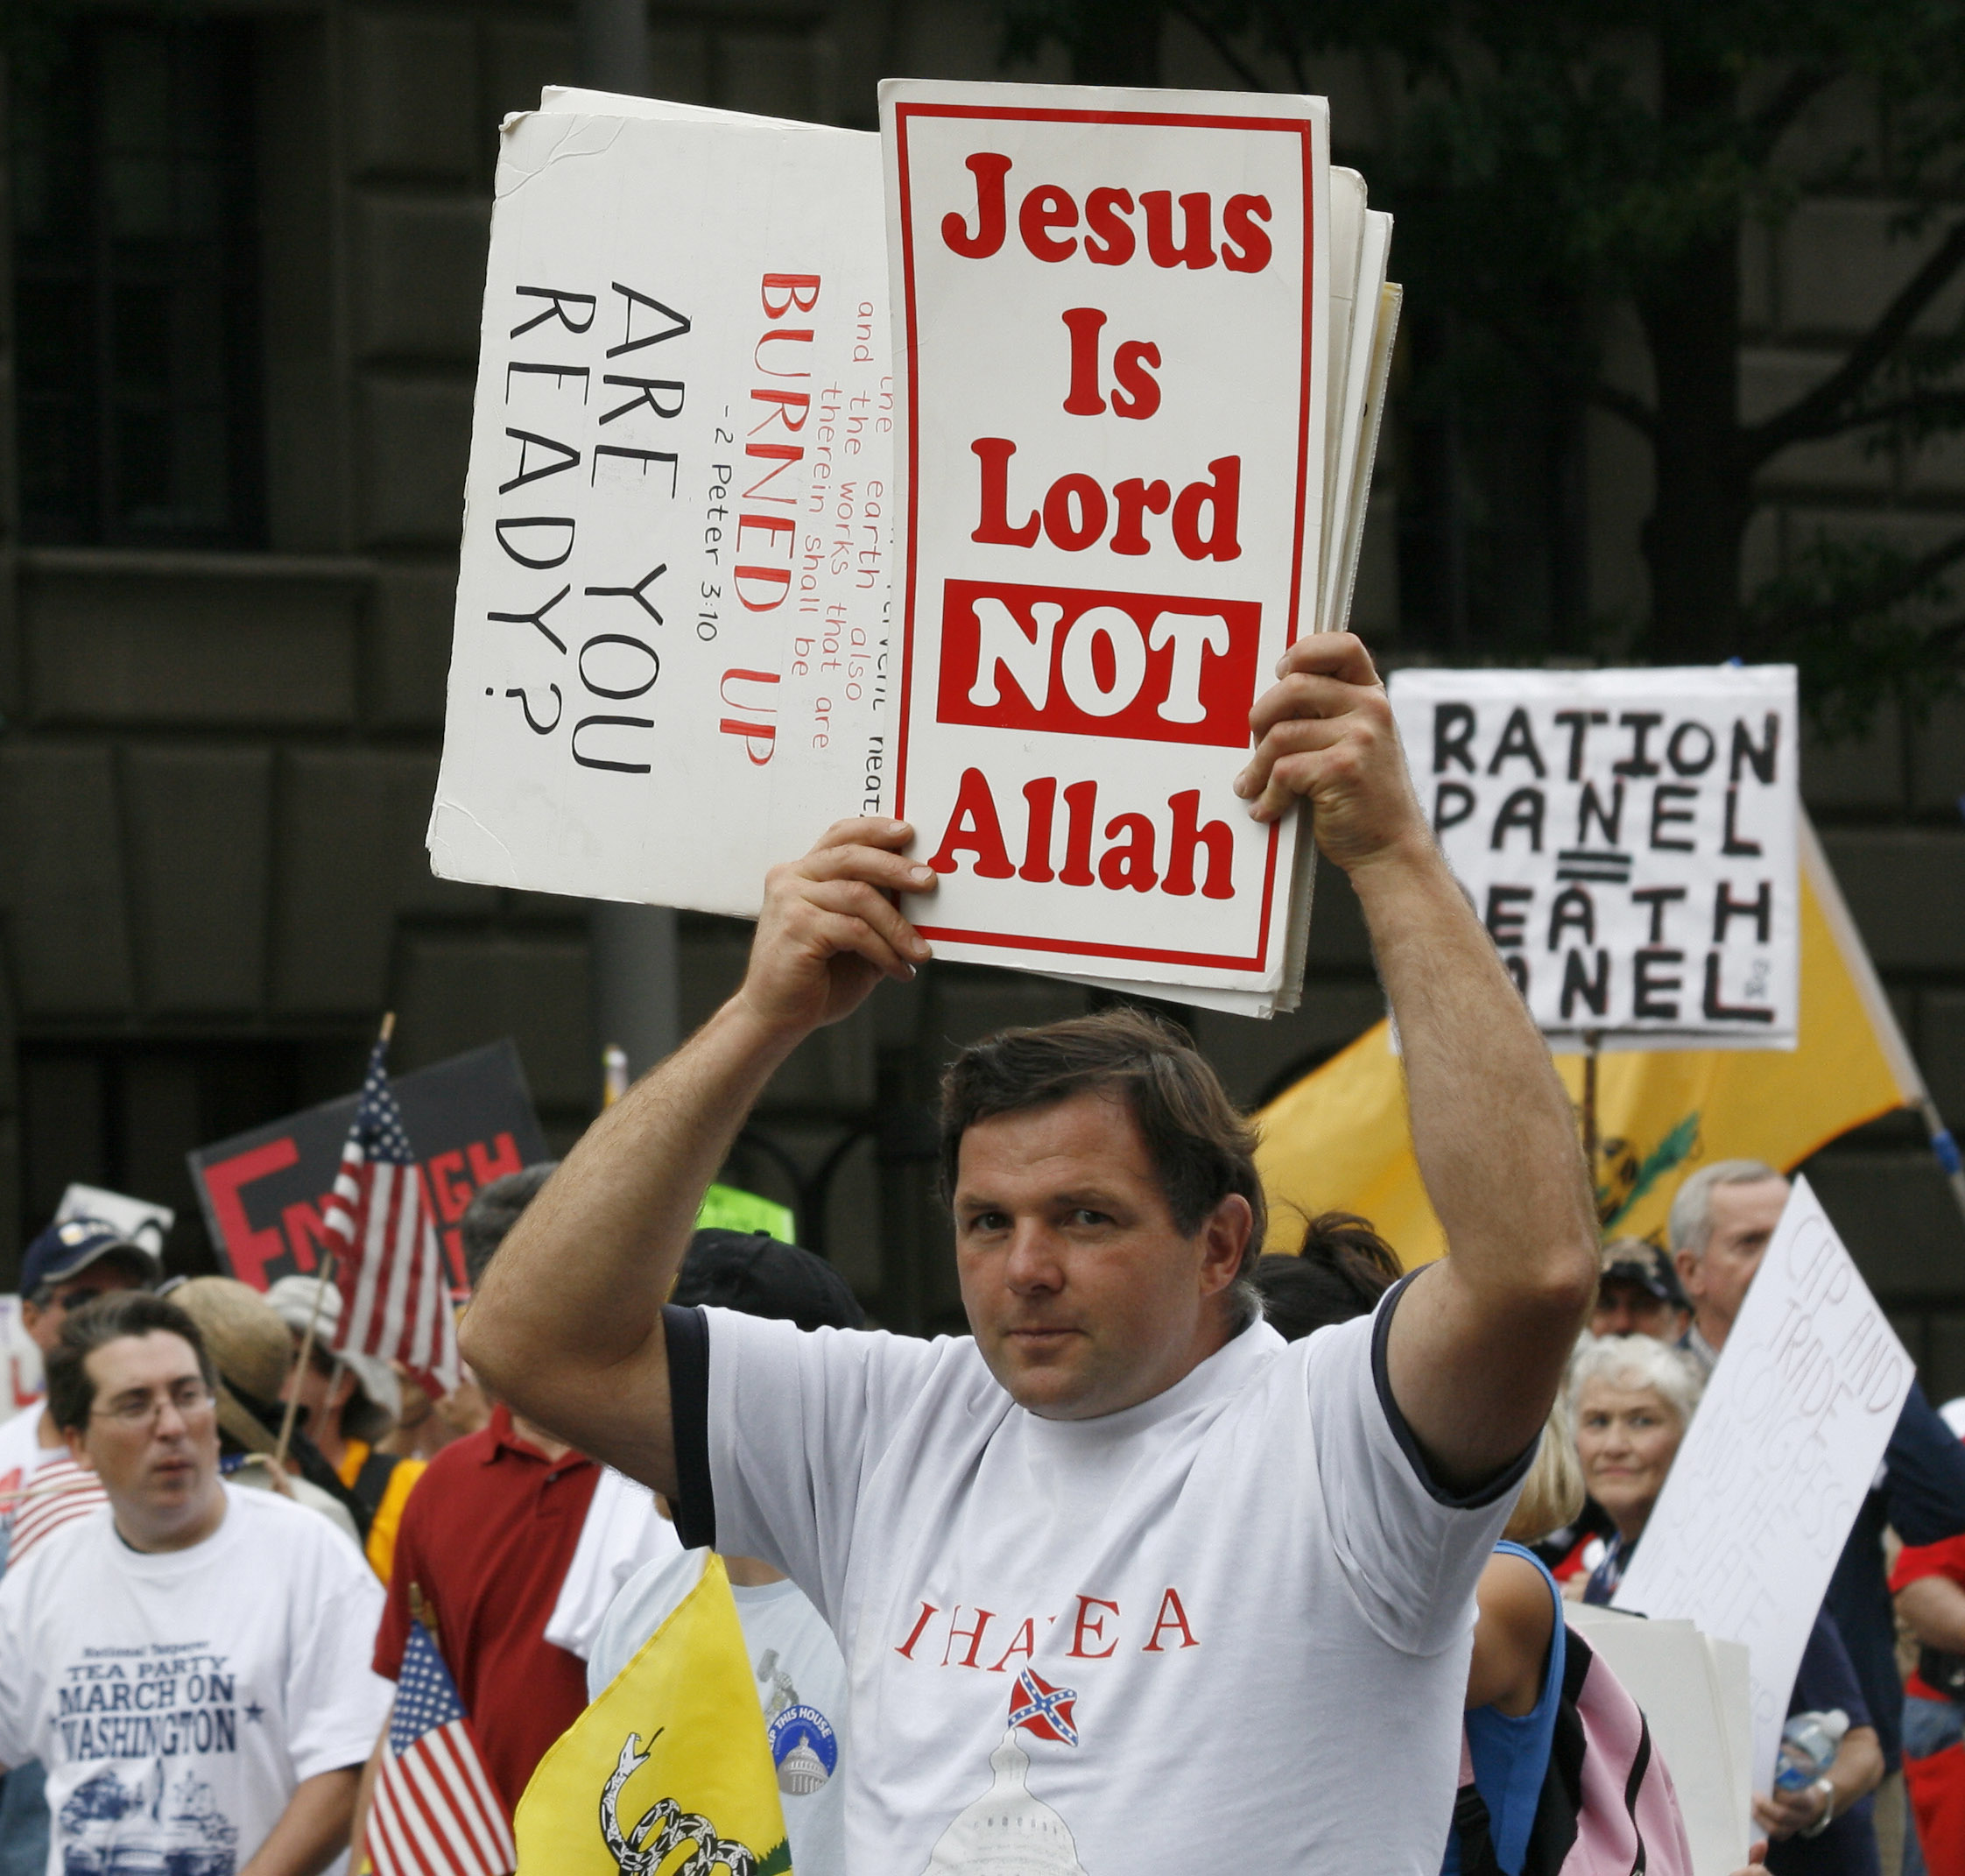 Christian protester - Tea Party march